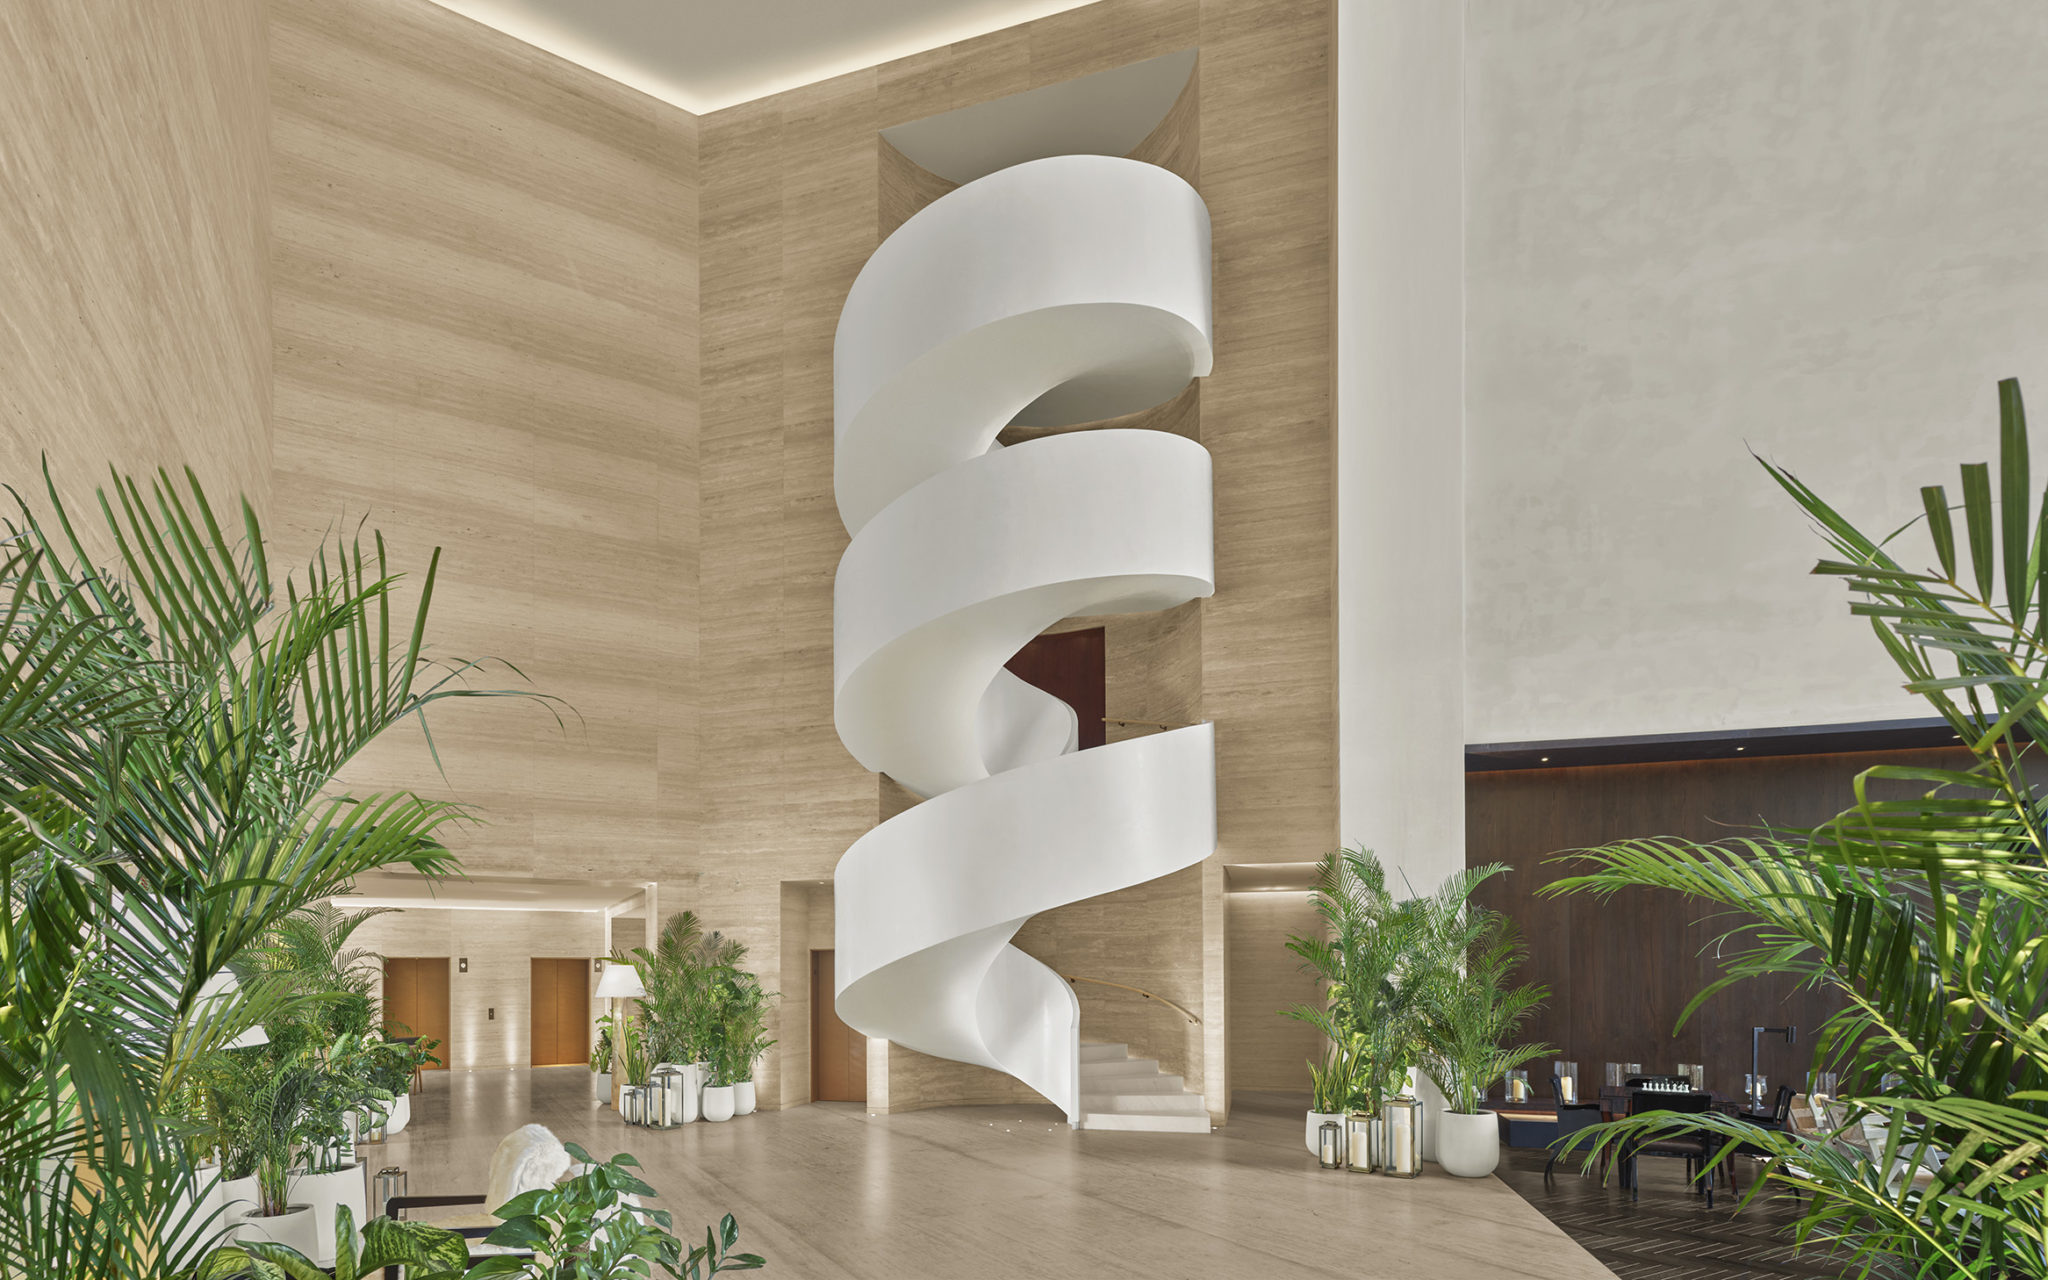 Large white spiral staircase in lobby